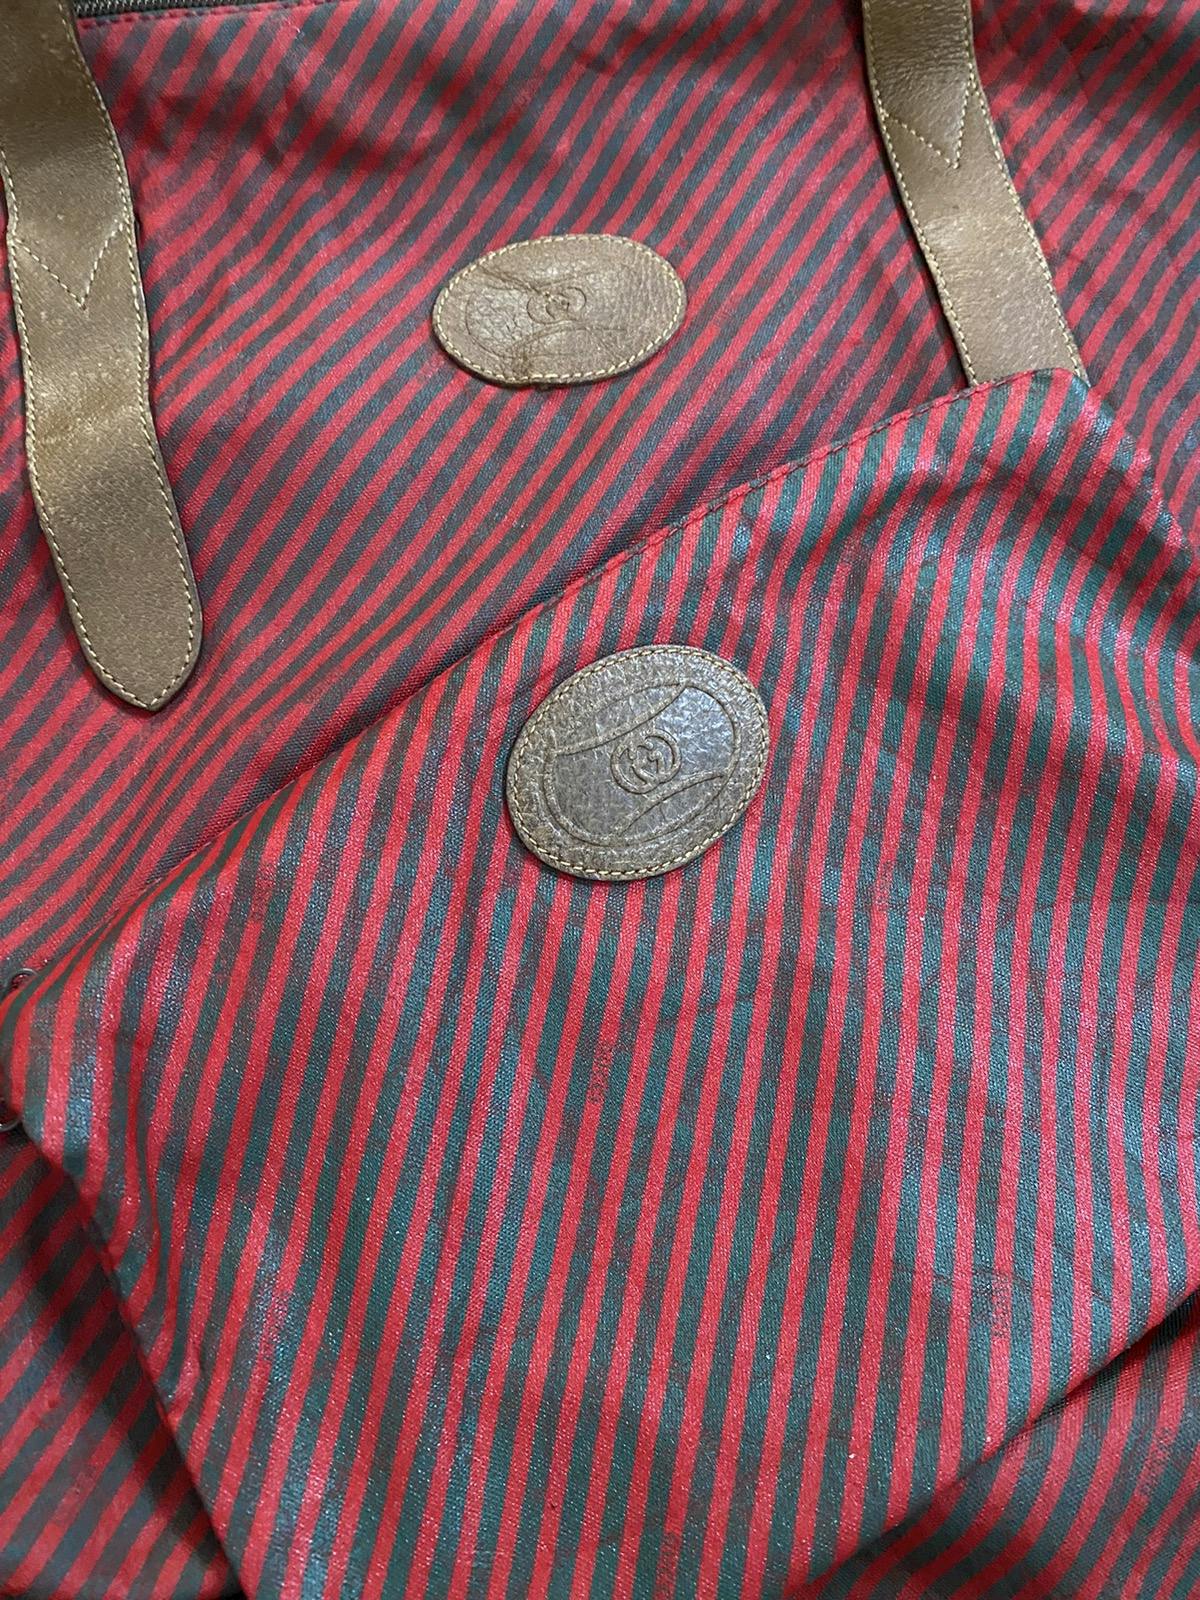 Vintage GUCCI Accessory Collection Striped Travel Duffle Bag - 7